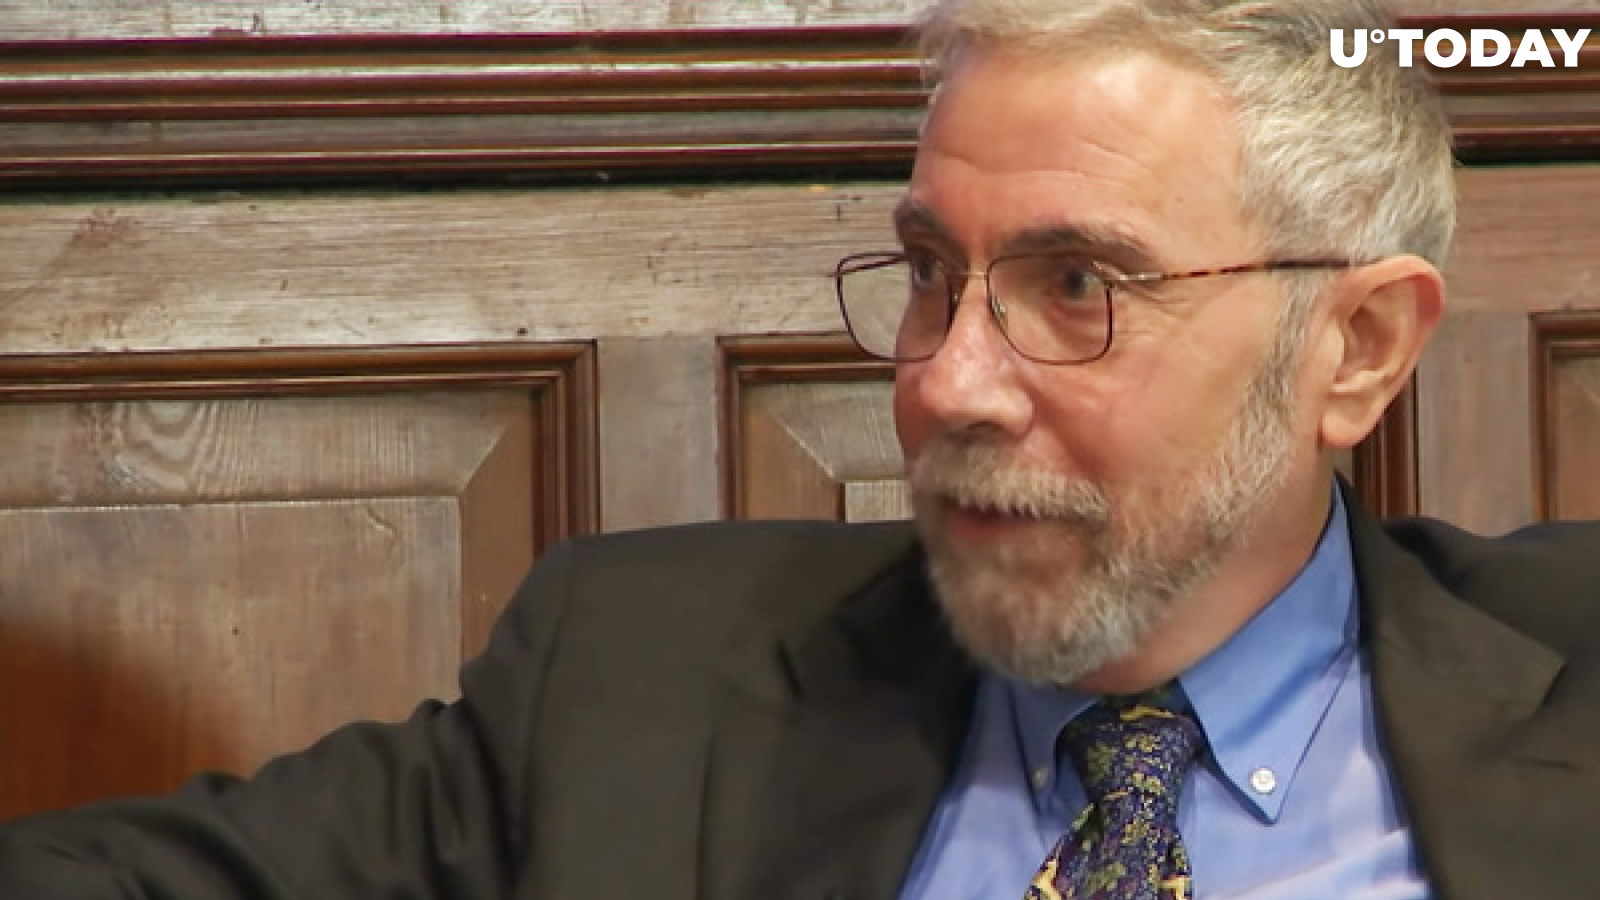 Nobel Laureate Paul Krugman Explained Possible Stablecoin Crisis in the Future